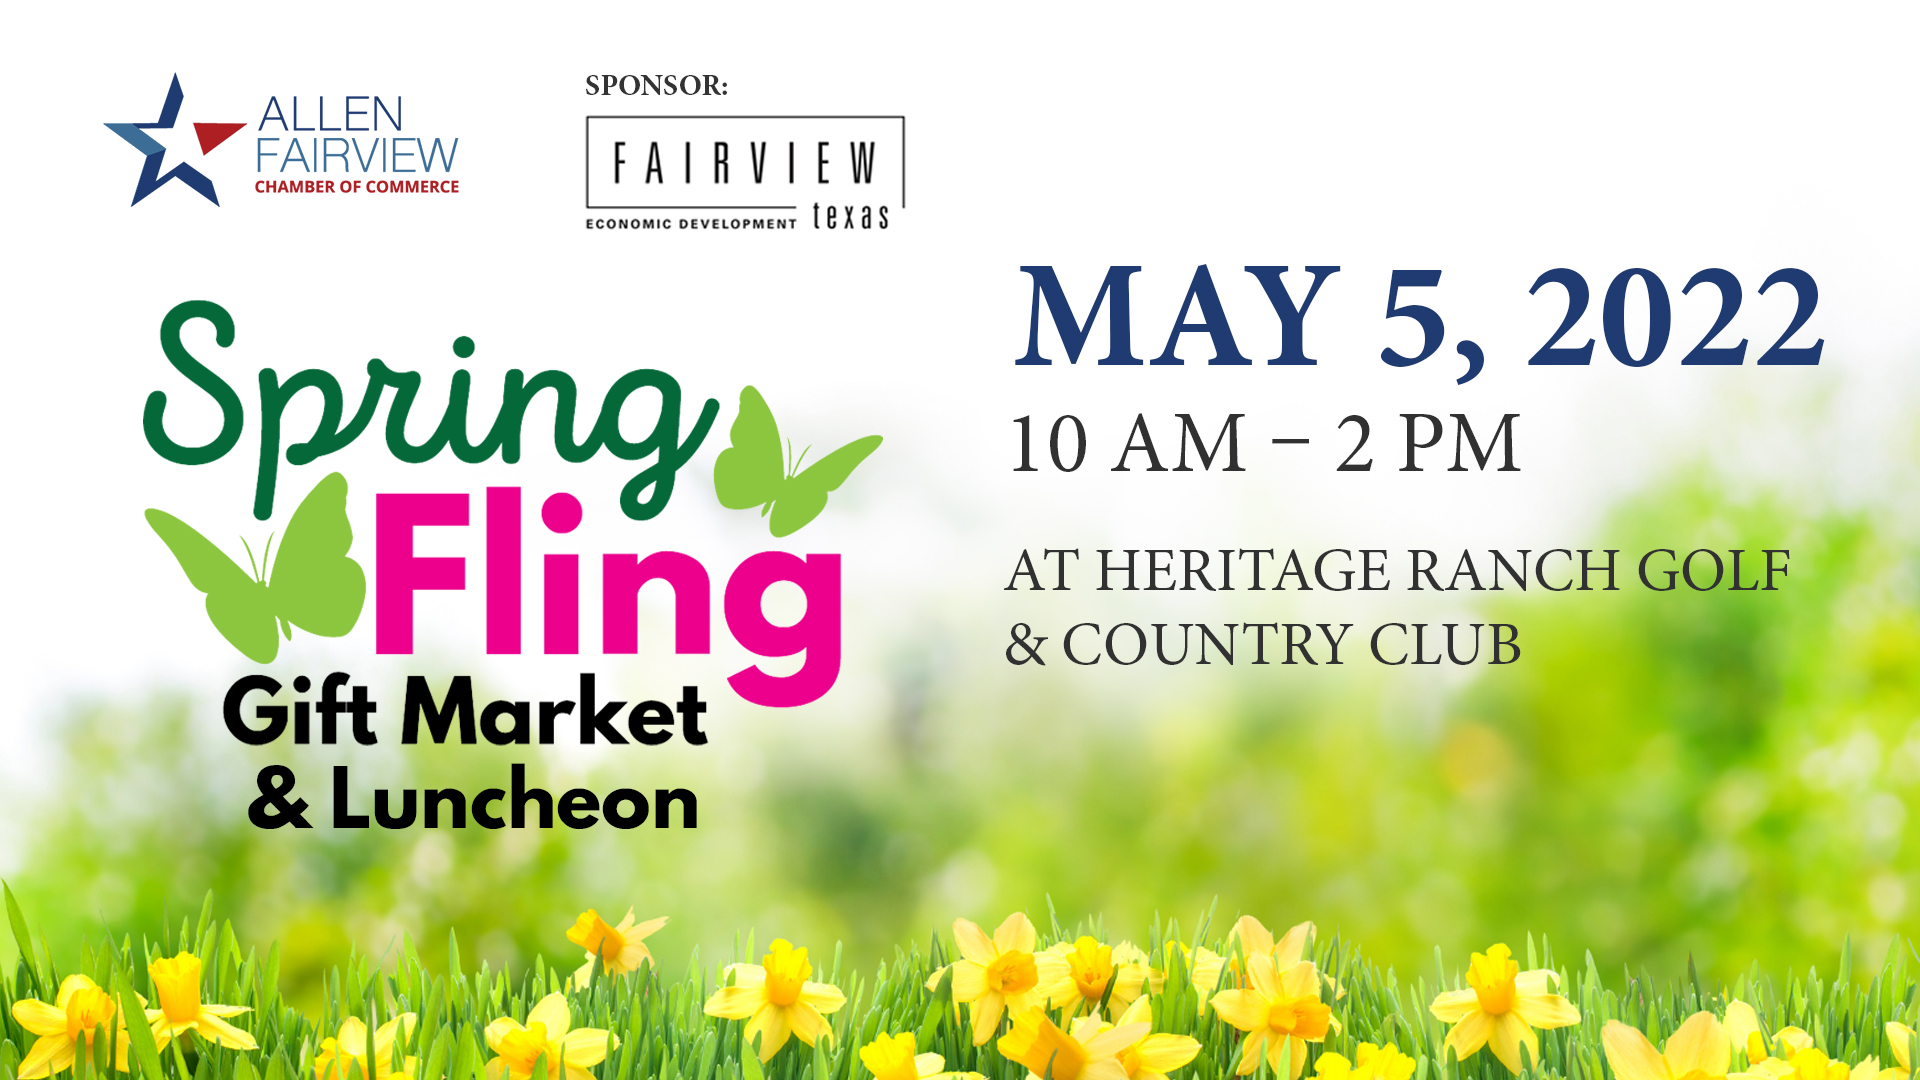 Featured image for “Fairview EDC Sponsors Spring Fling Gift Market & Luncheon”